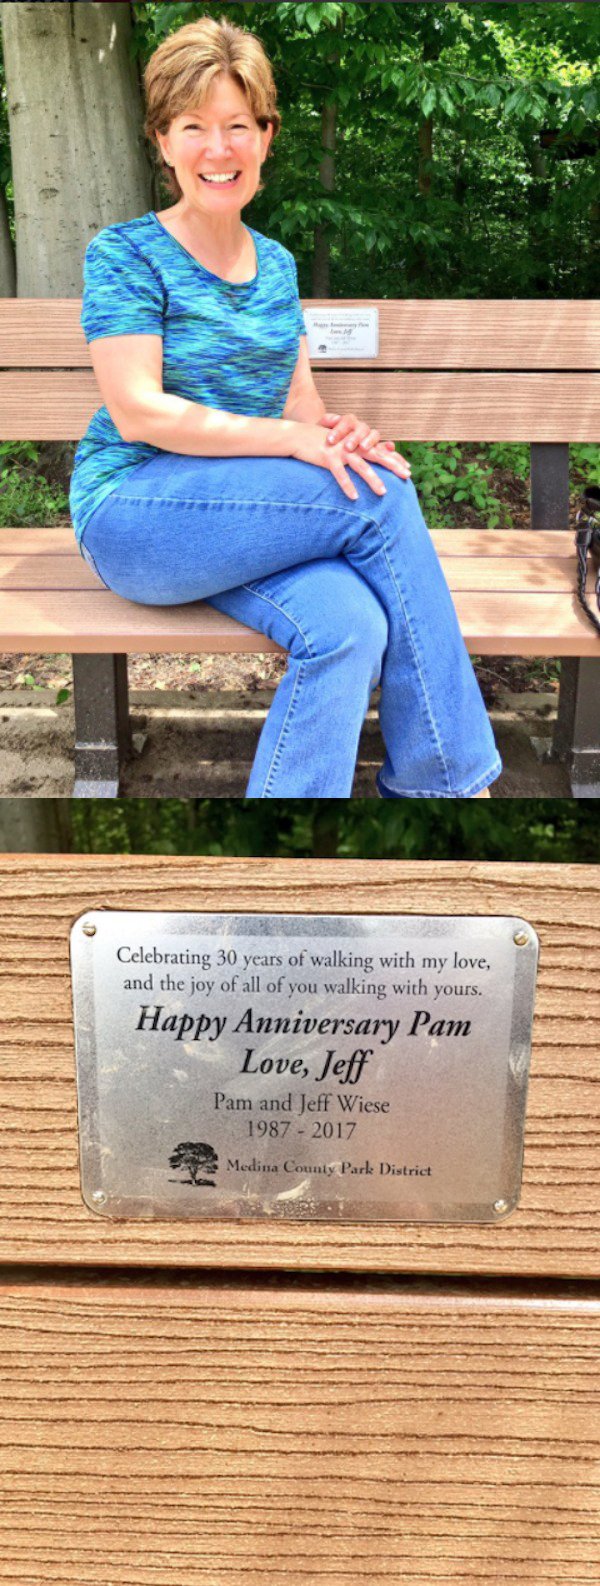 Marriage - Celebrating 30 years of walking with my love, and the joy of all of you walking with yours. Happy Anniversary Pam Love, Jeff Pam and Jeff Wiese 1987 2017 Medina County Park District